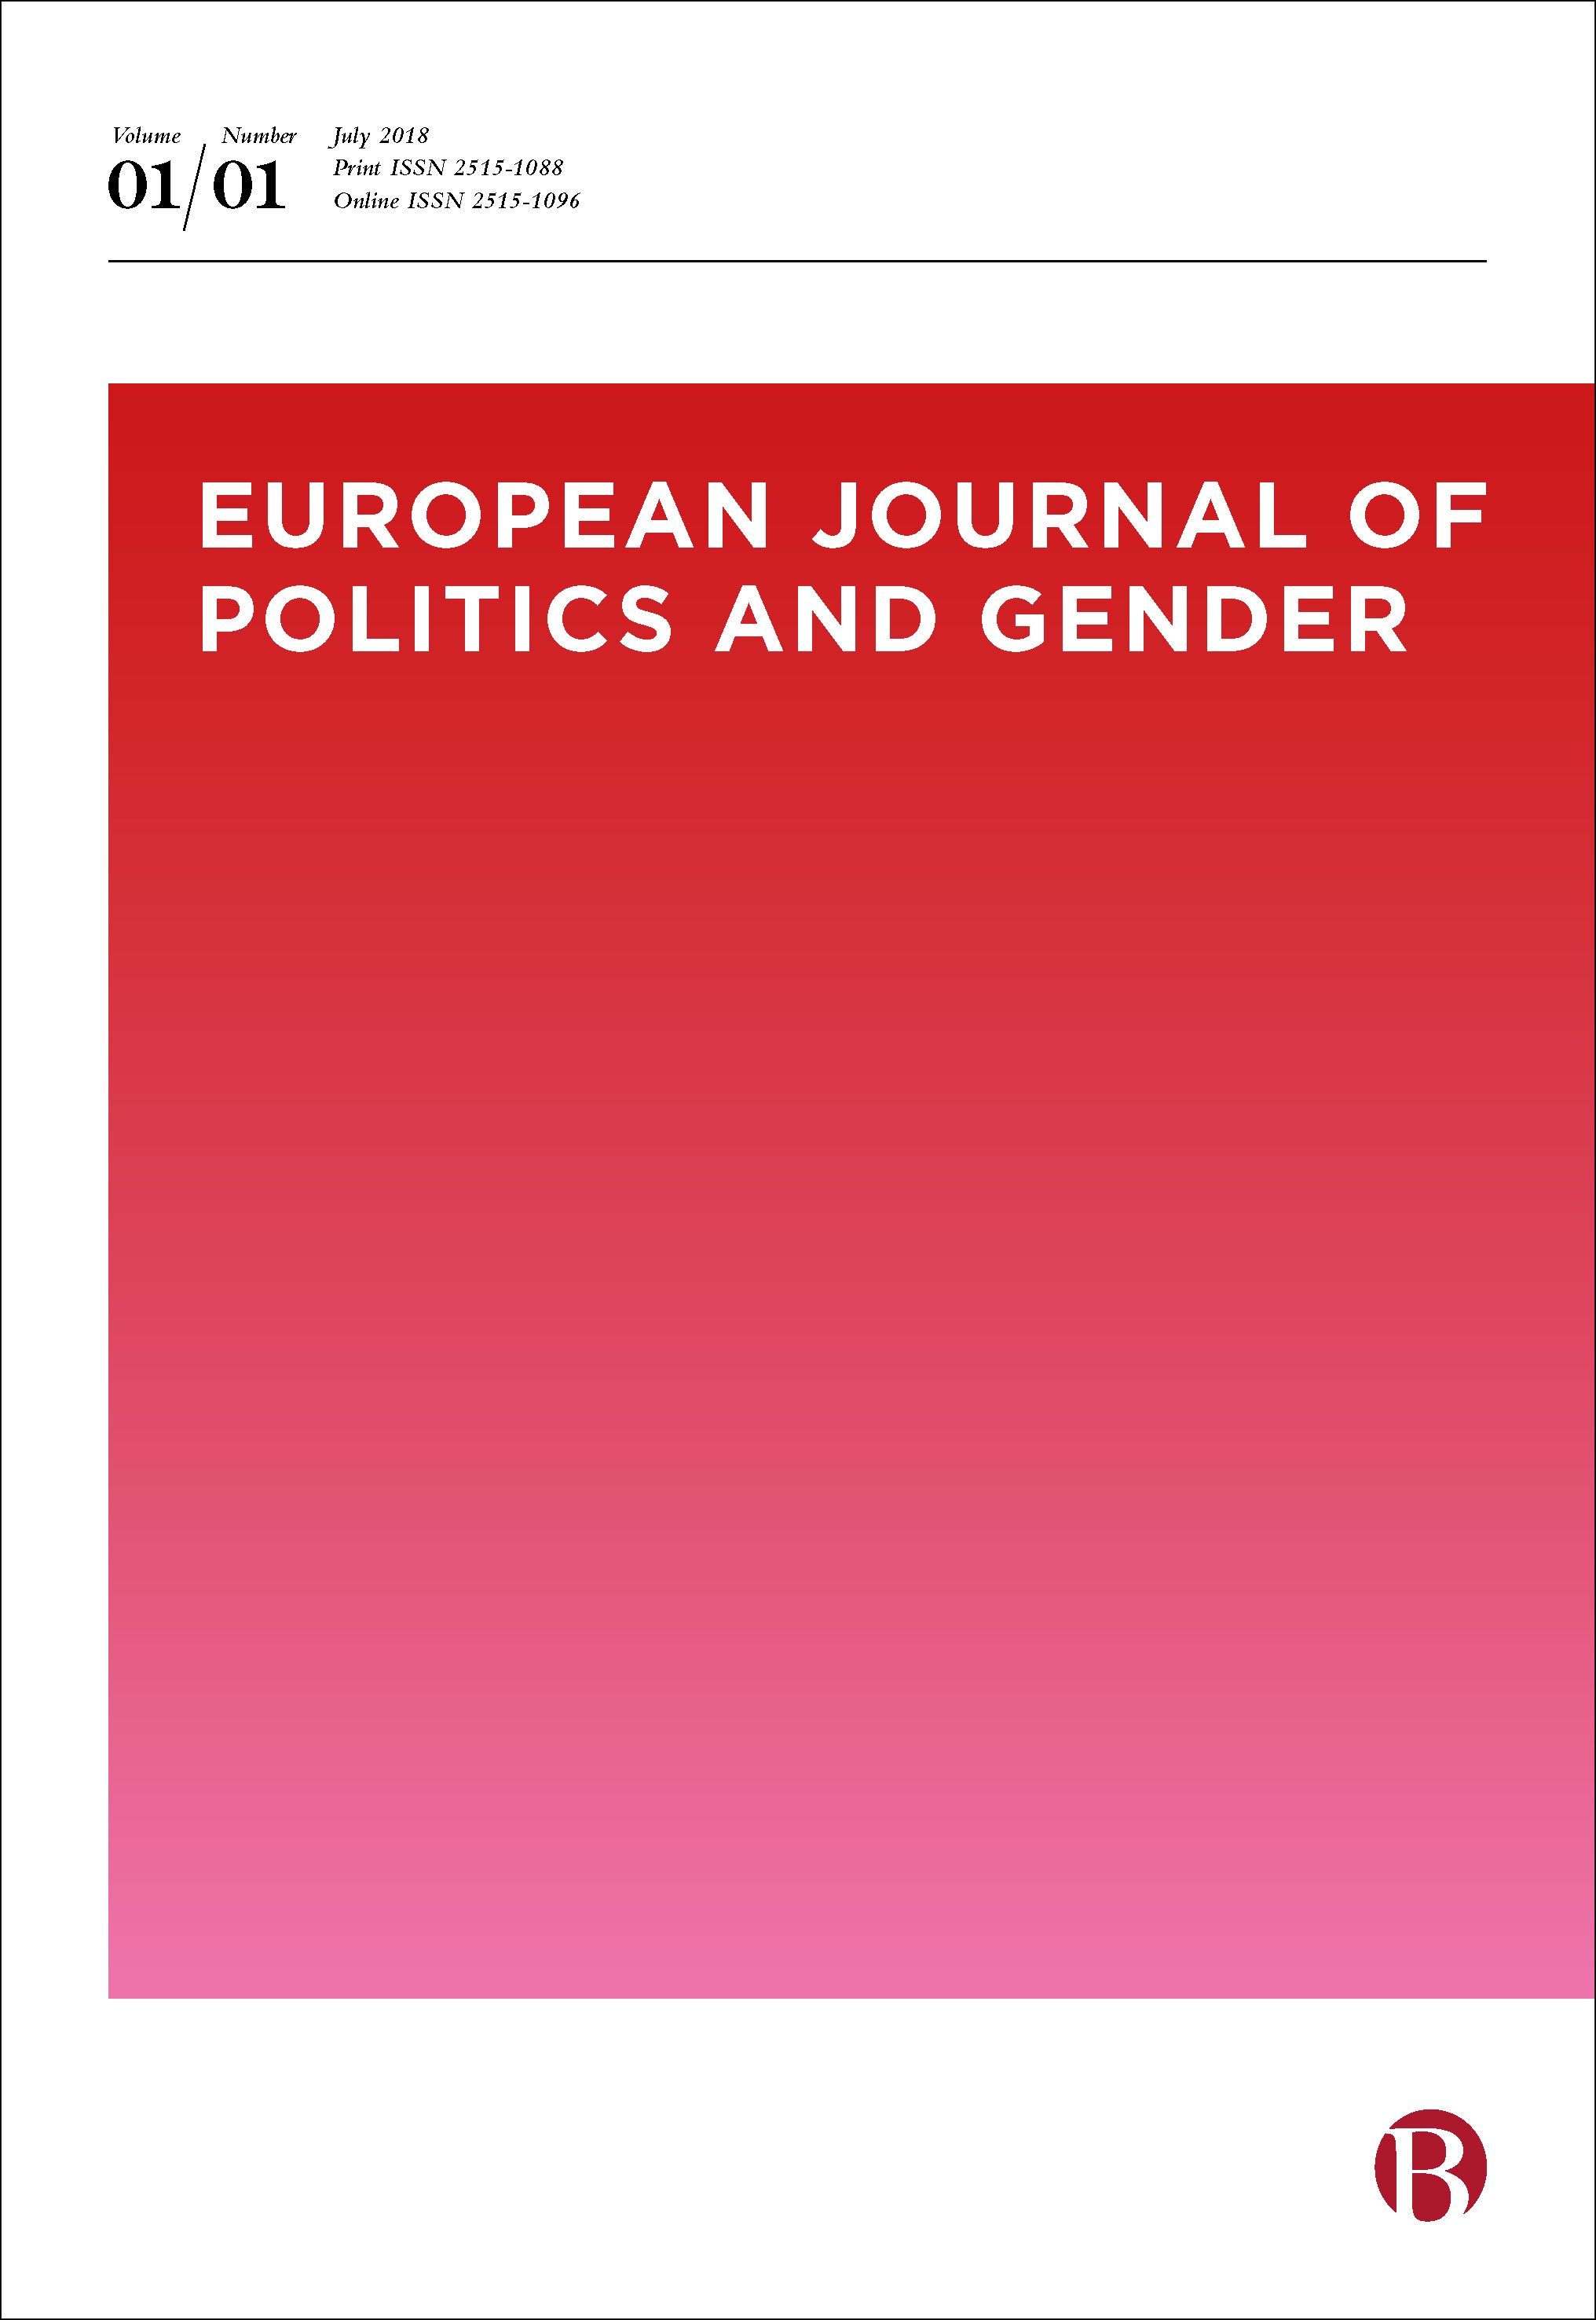 Introducing the new Editors of the European Journal of Politics and Gender